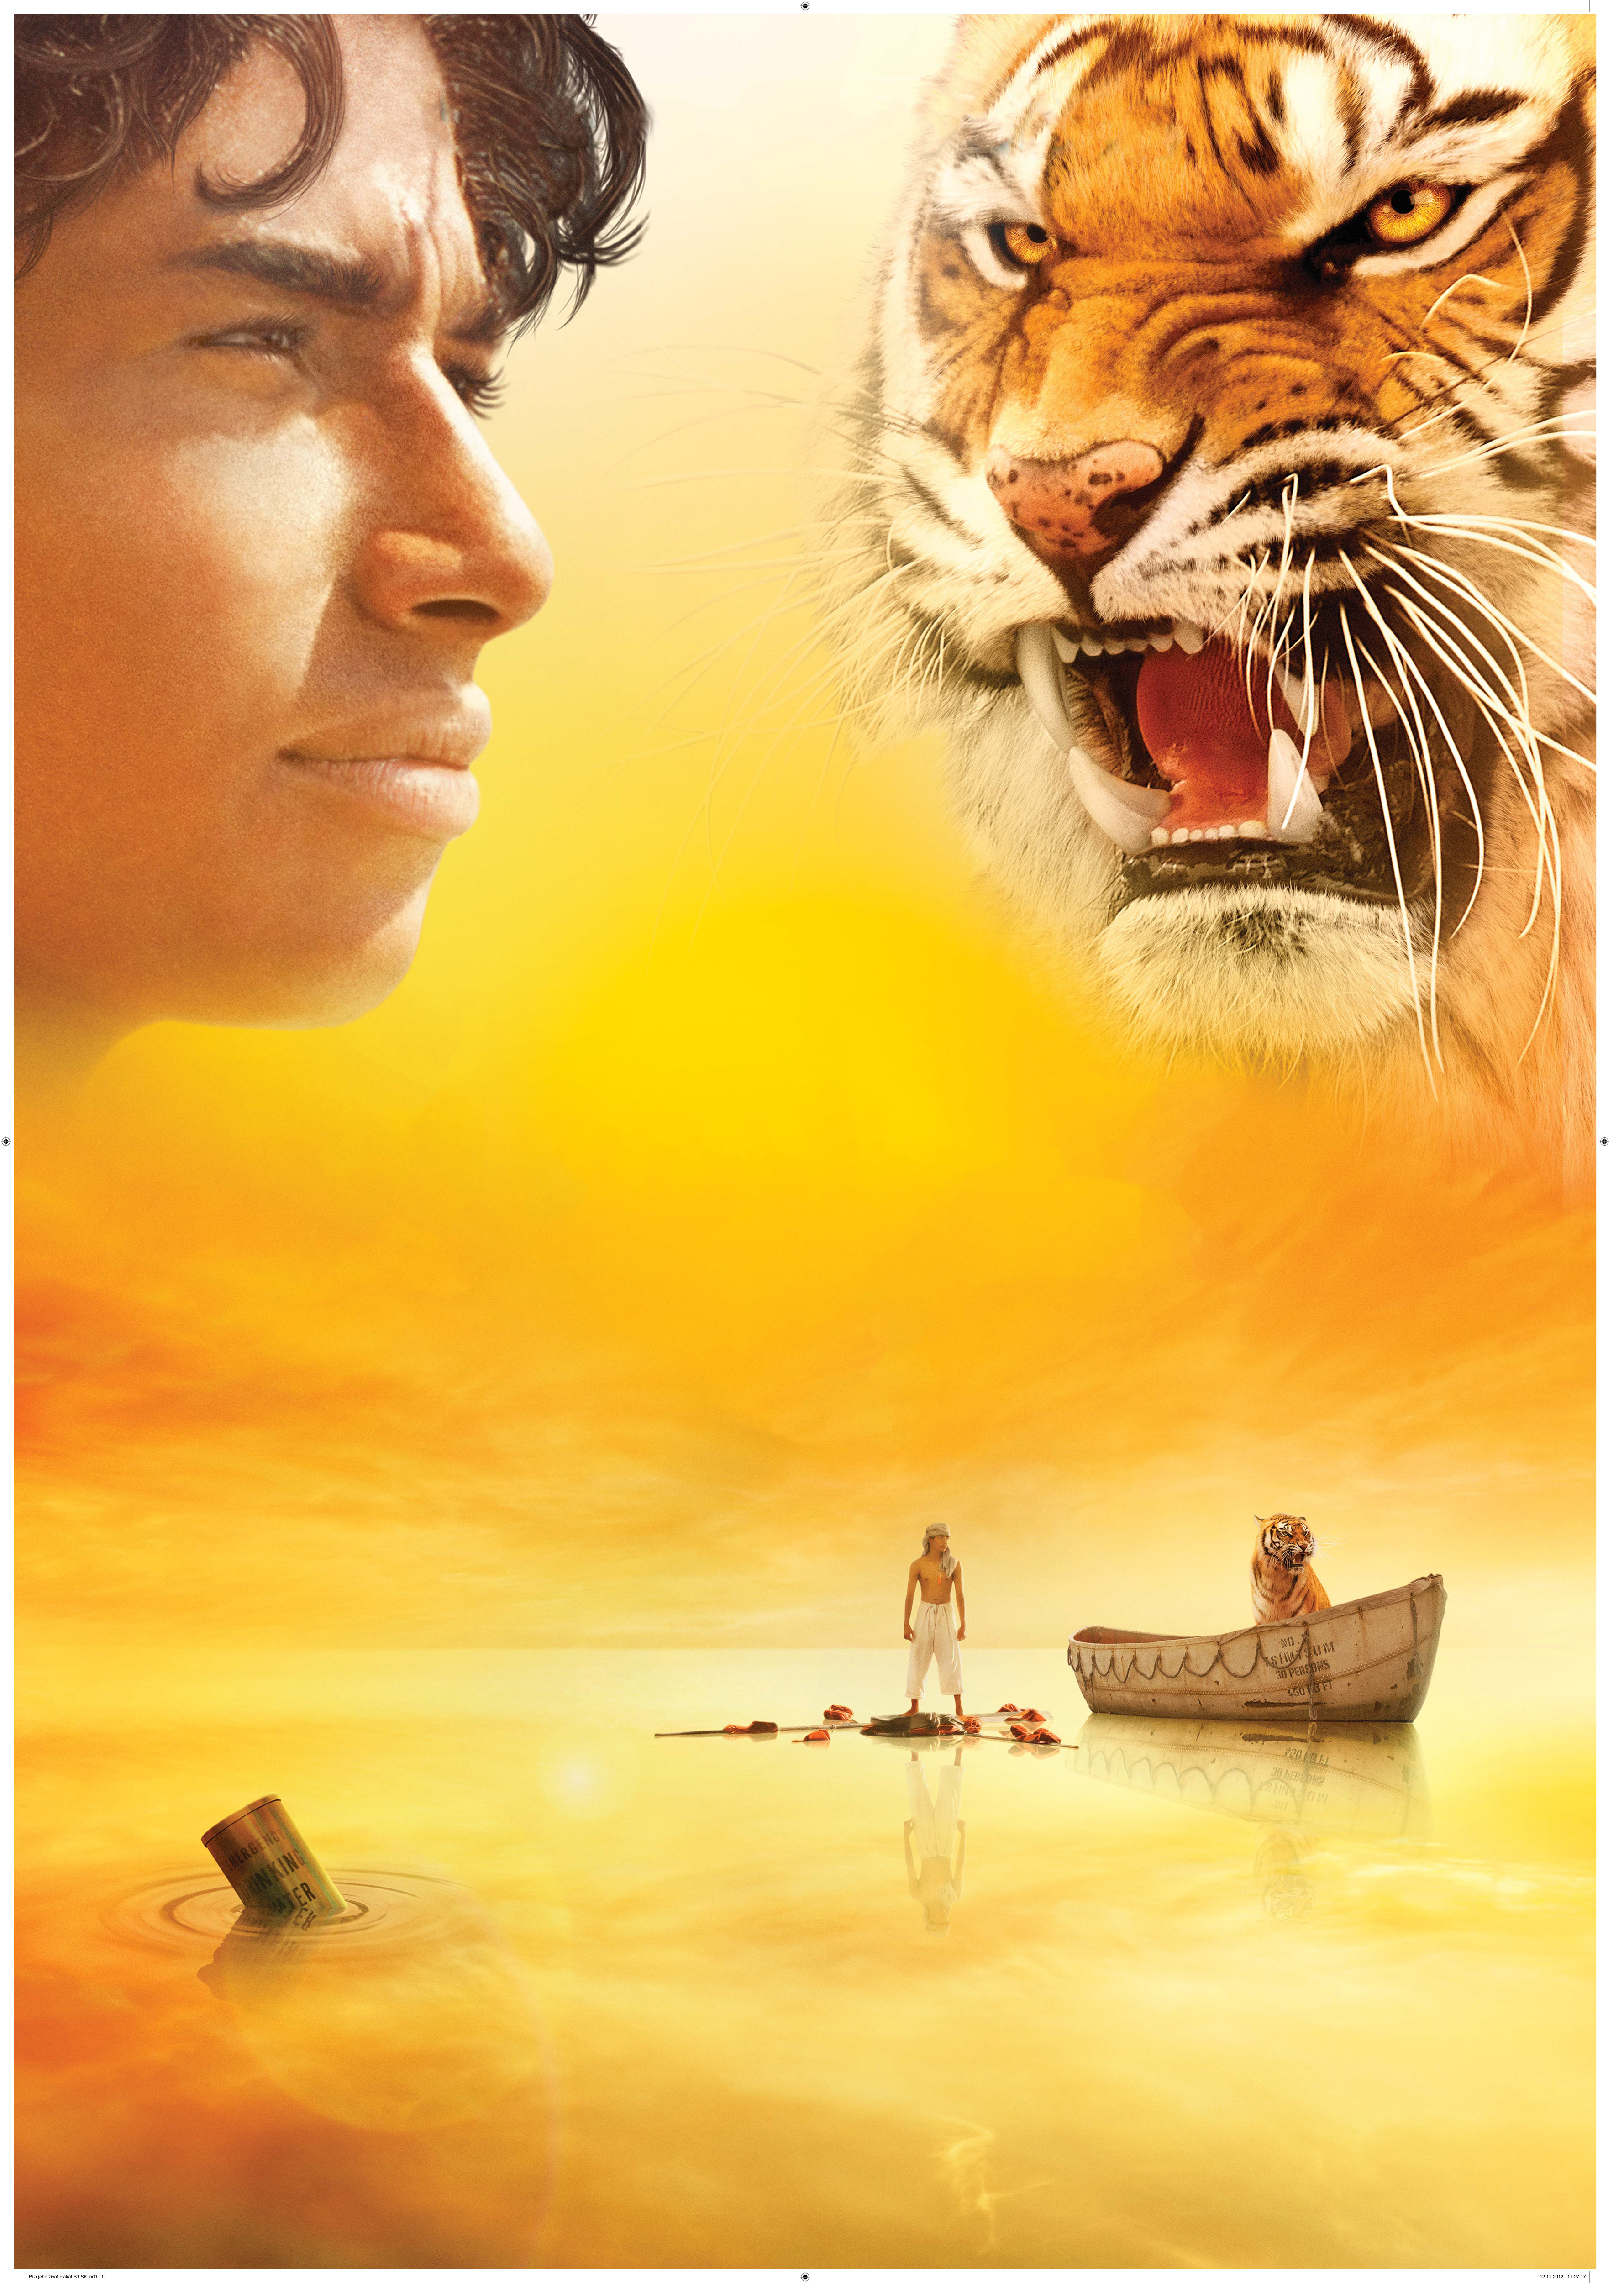 life of pi free online watch in hindi